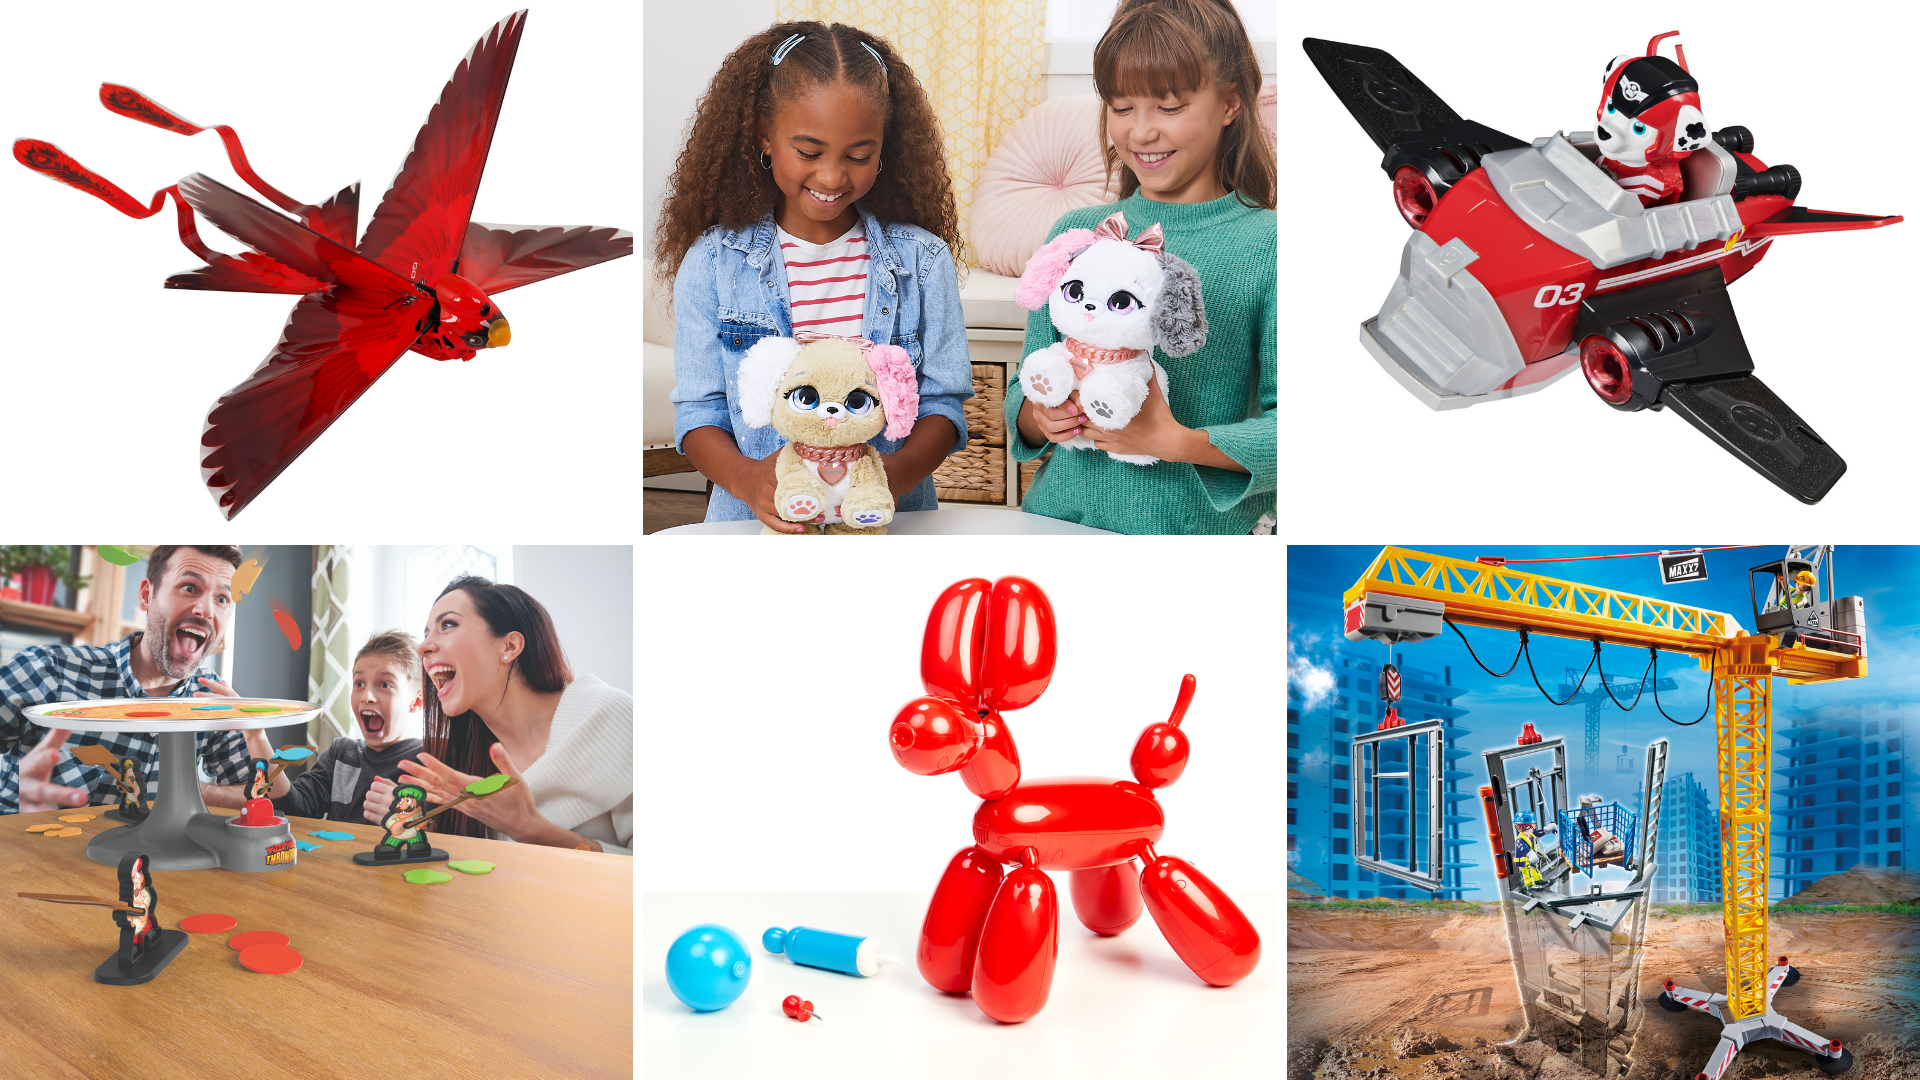 Toy Contests: Enter this 2020 30-day Toy Giveaway